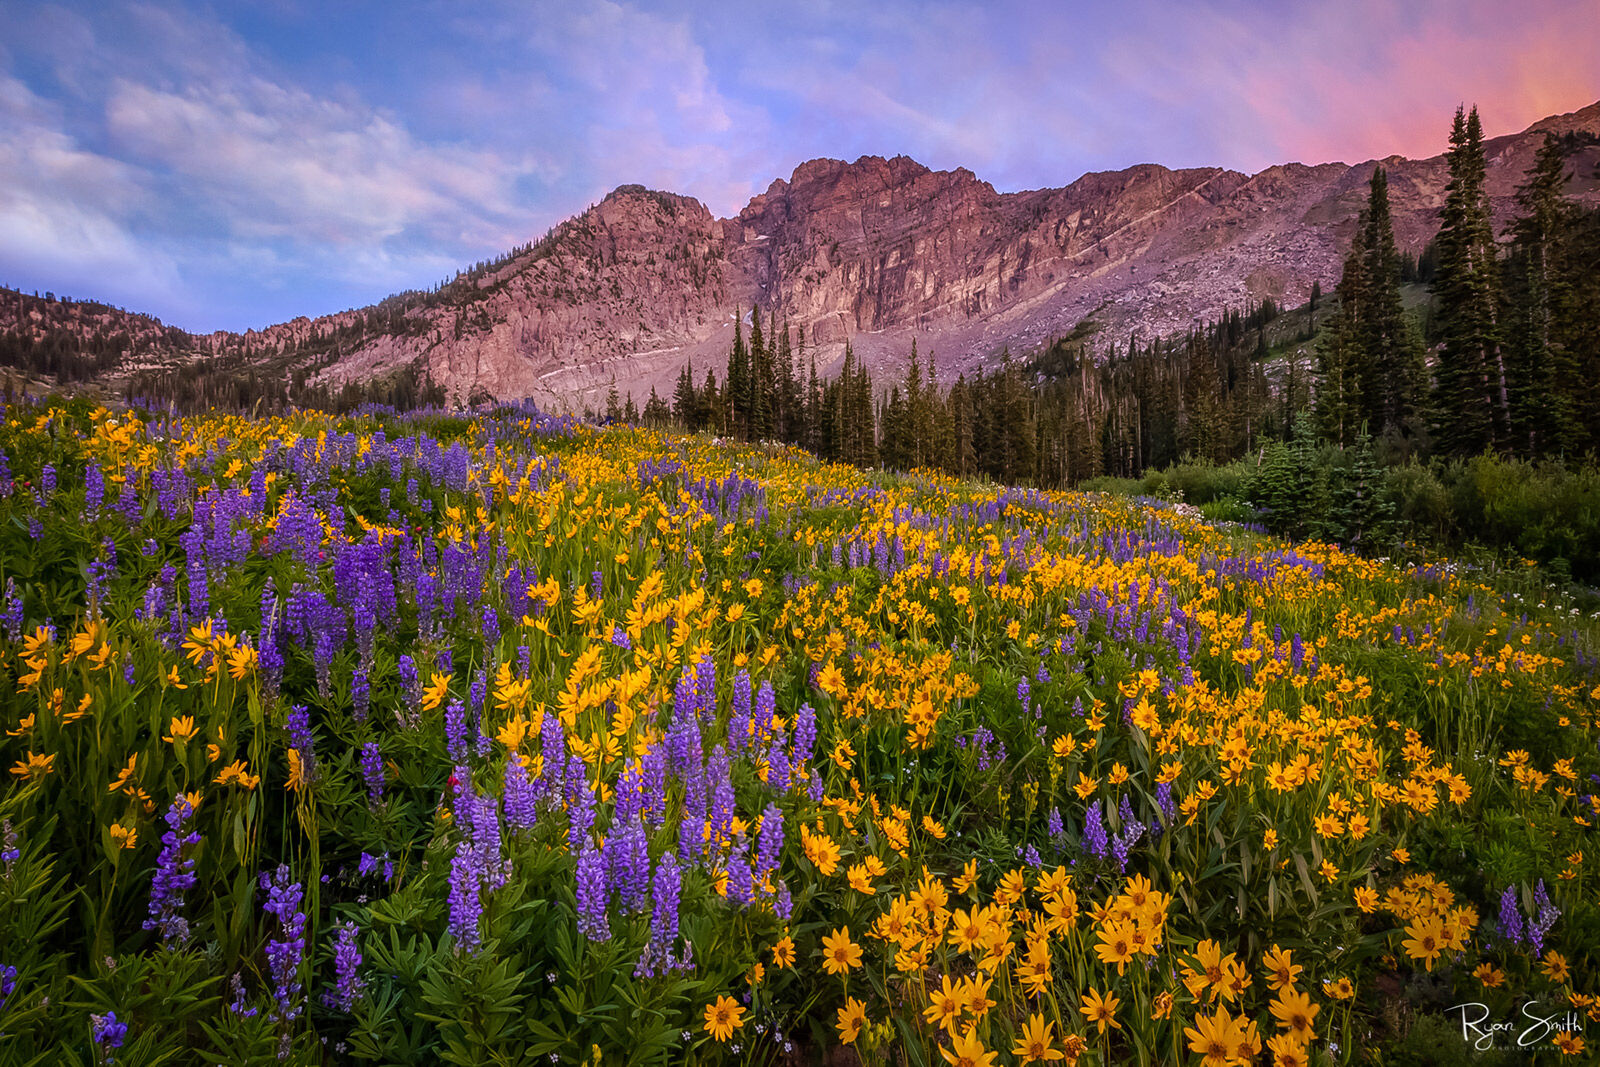 A meadow of yellow daisies and purple alpine lupine sits below mountains in Utah at sunset. 